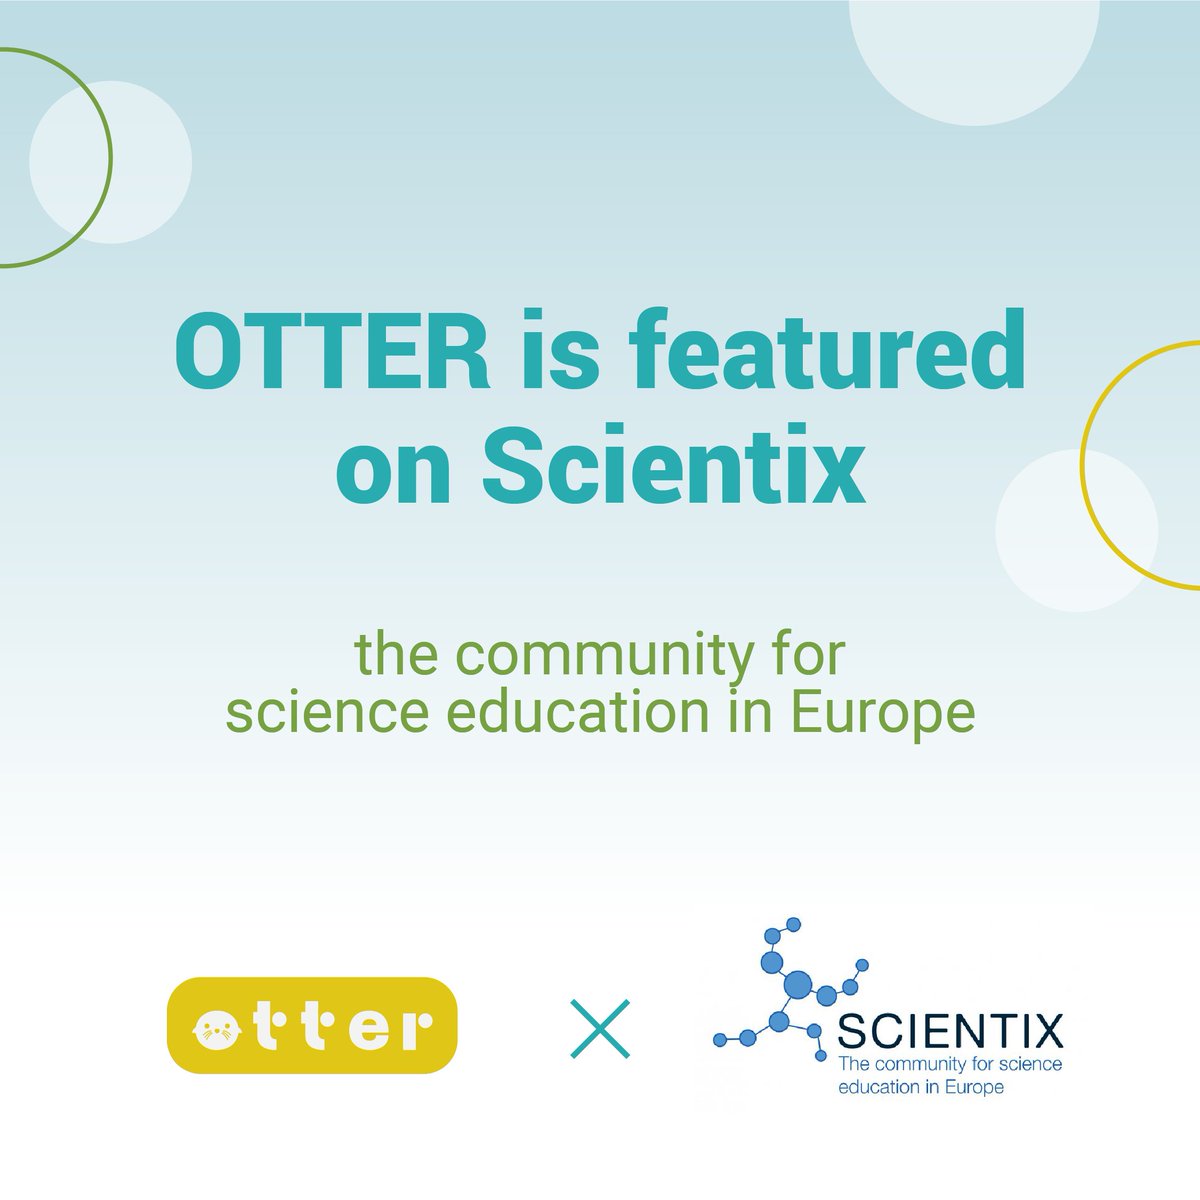 💙We are deeply honoured to be featured in the Projects section of the @scientix_eu community dedicated to #ScienceEducation and #ScienceEducators! The section displays key information on our project's mission and results: 👉 scientix.eu/projects/proje…